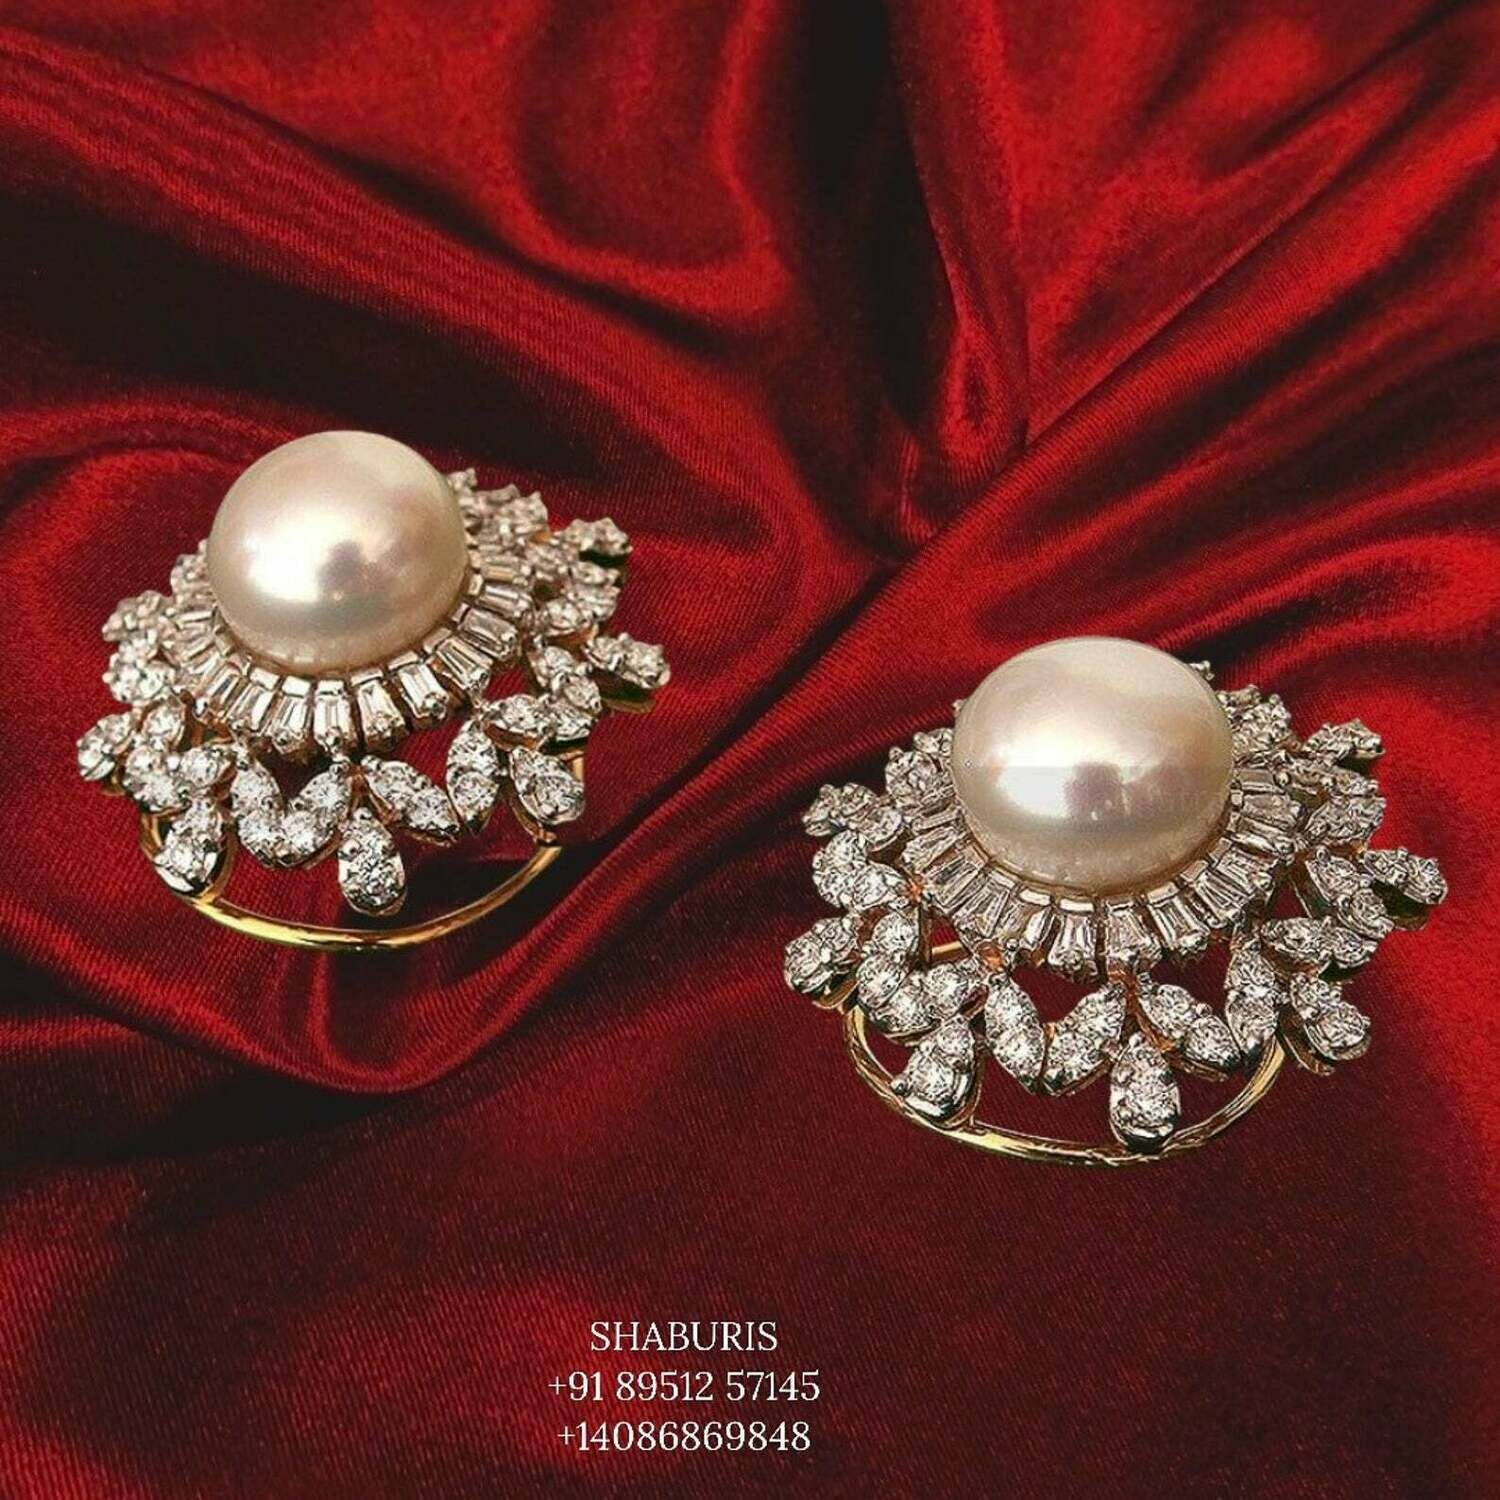 Latest Indian Jewelry,South Indian Jewelry,Pure silver studs Indian,Indian Earrings,Indian Wedding Jewelry -NIHIRA-SHABURIS